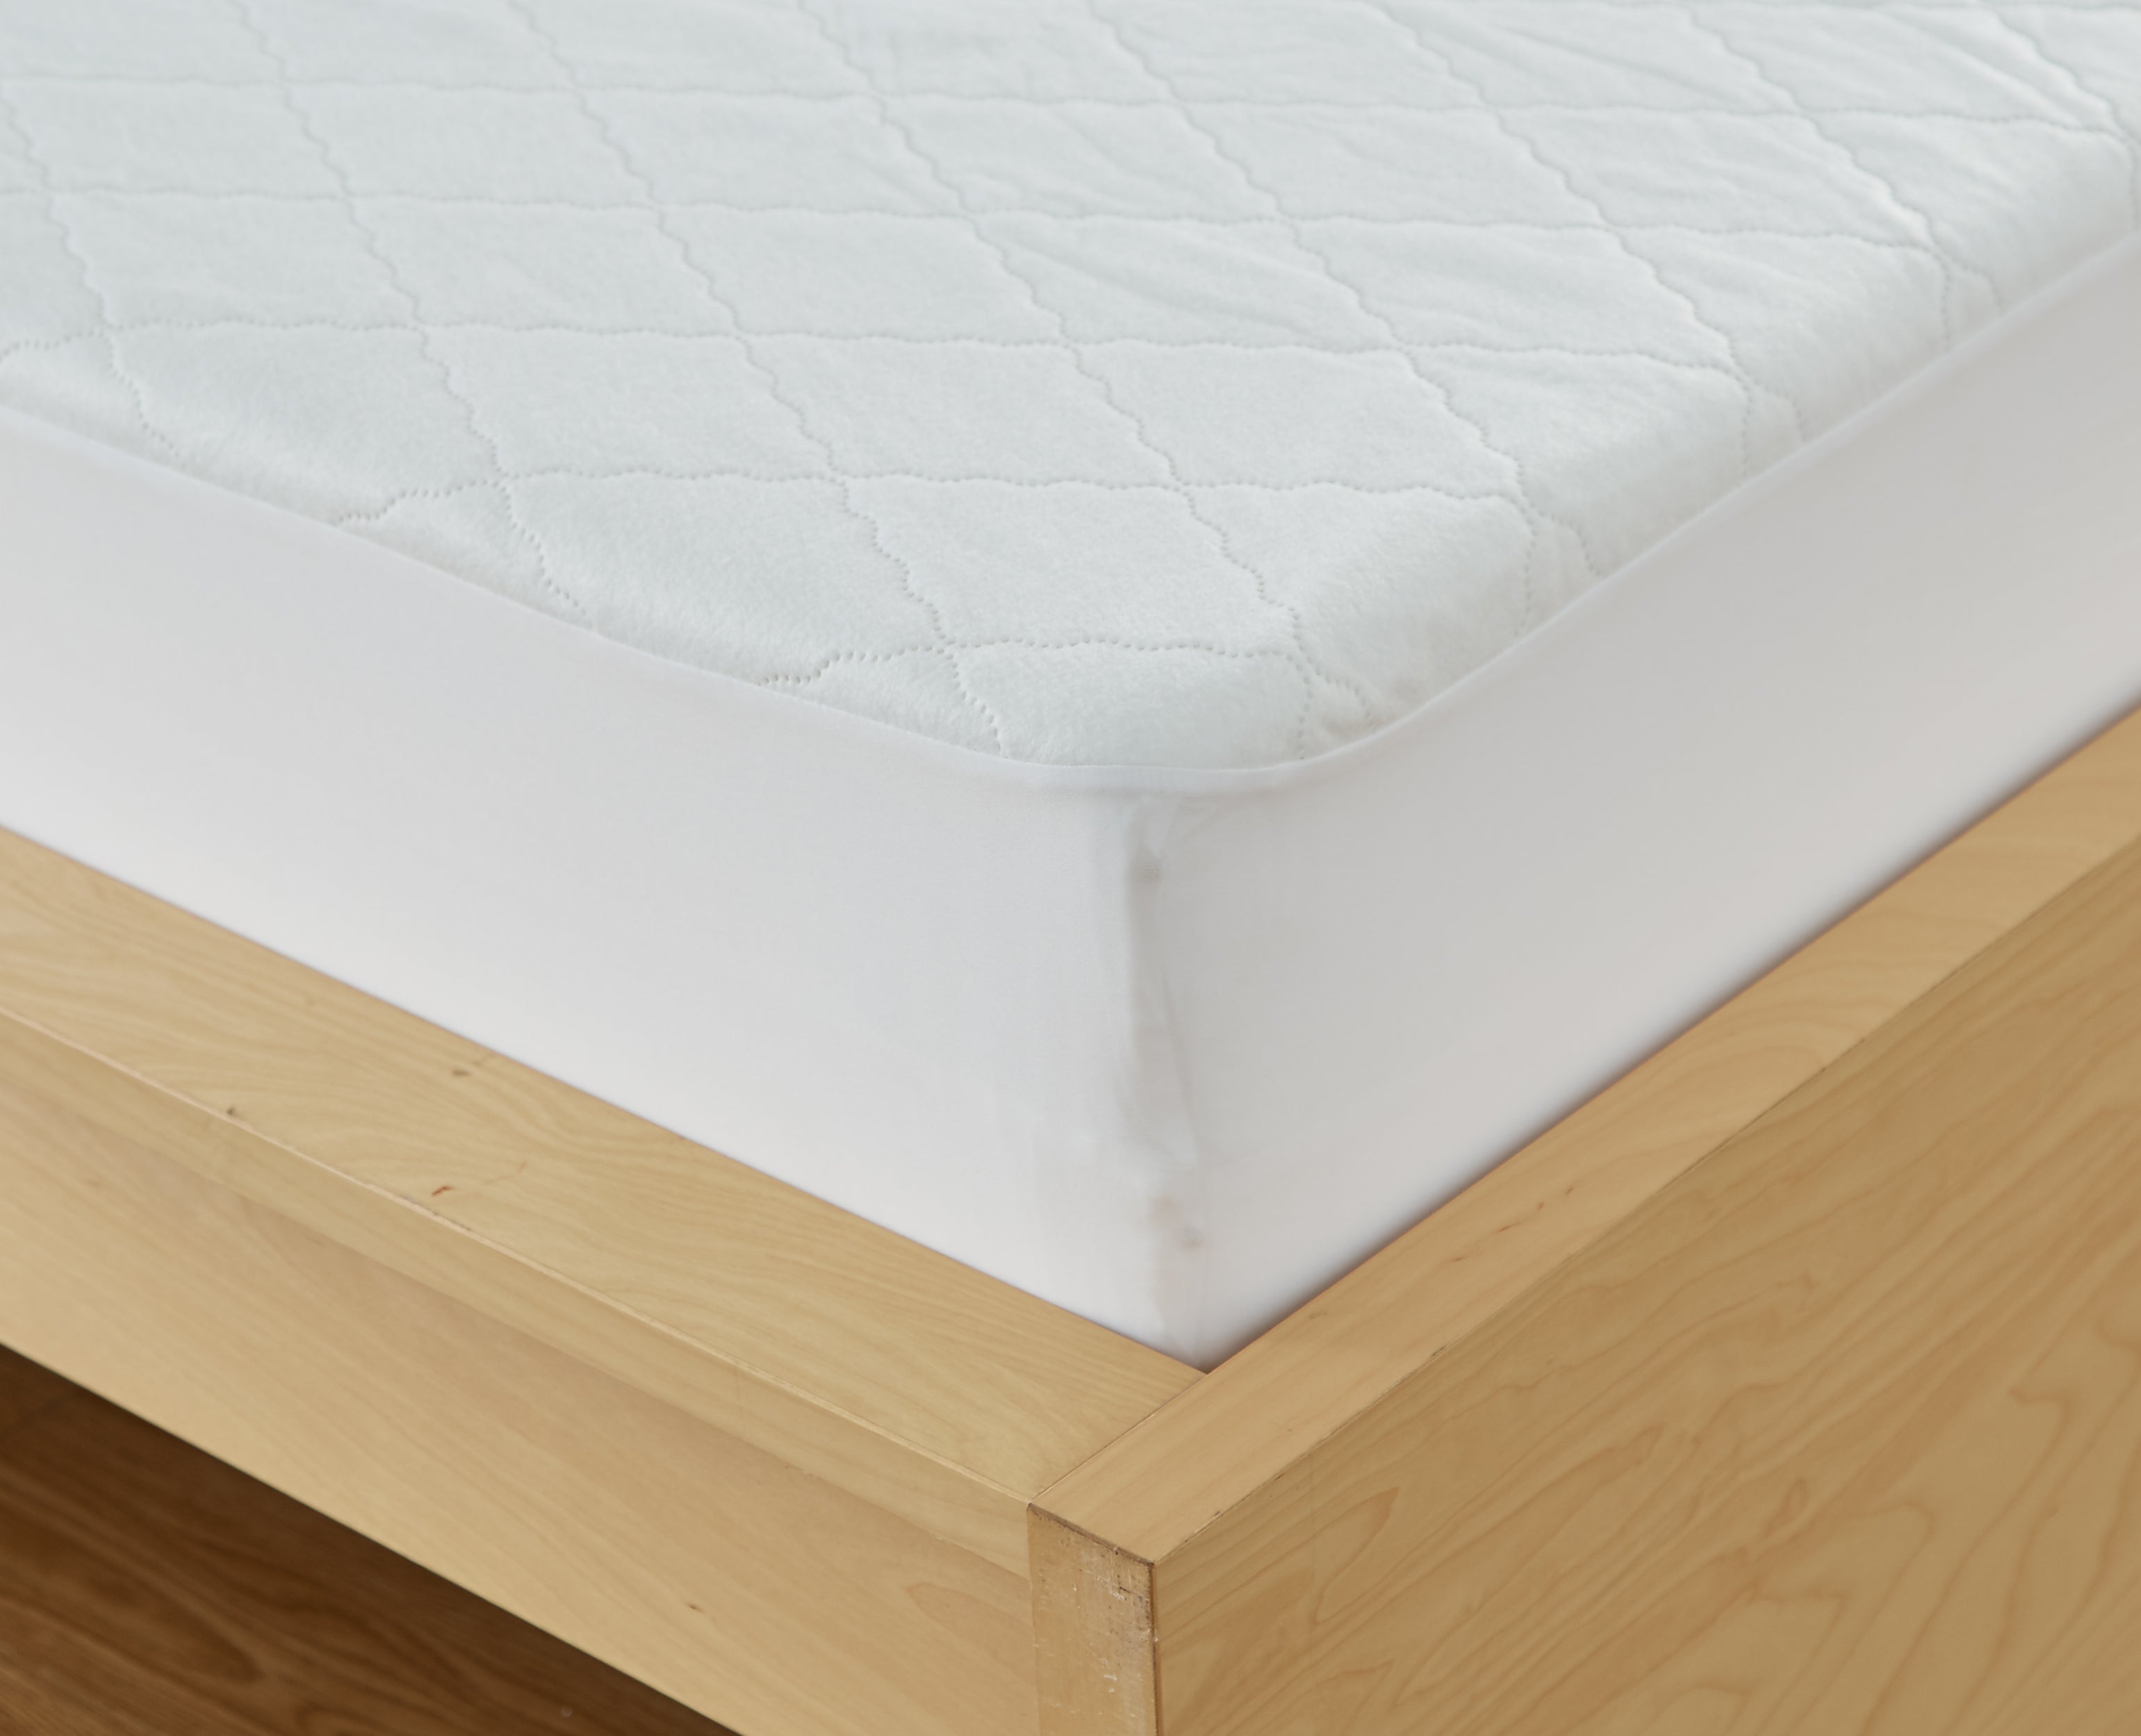 Quilted Waterproof Mattress Pads - Anchor Band and Fitted Style Available Waterproof Mattress Pad Bargoose Home Textiles, Inc. 